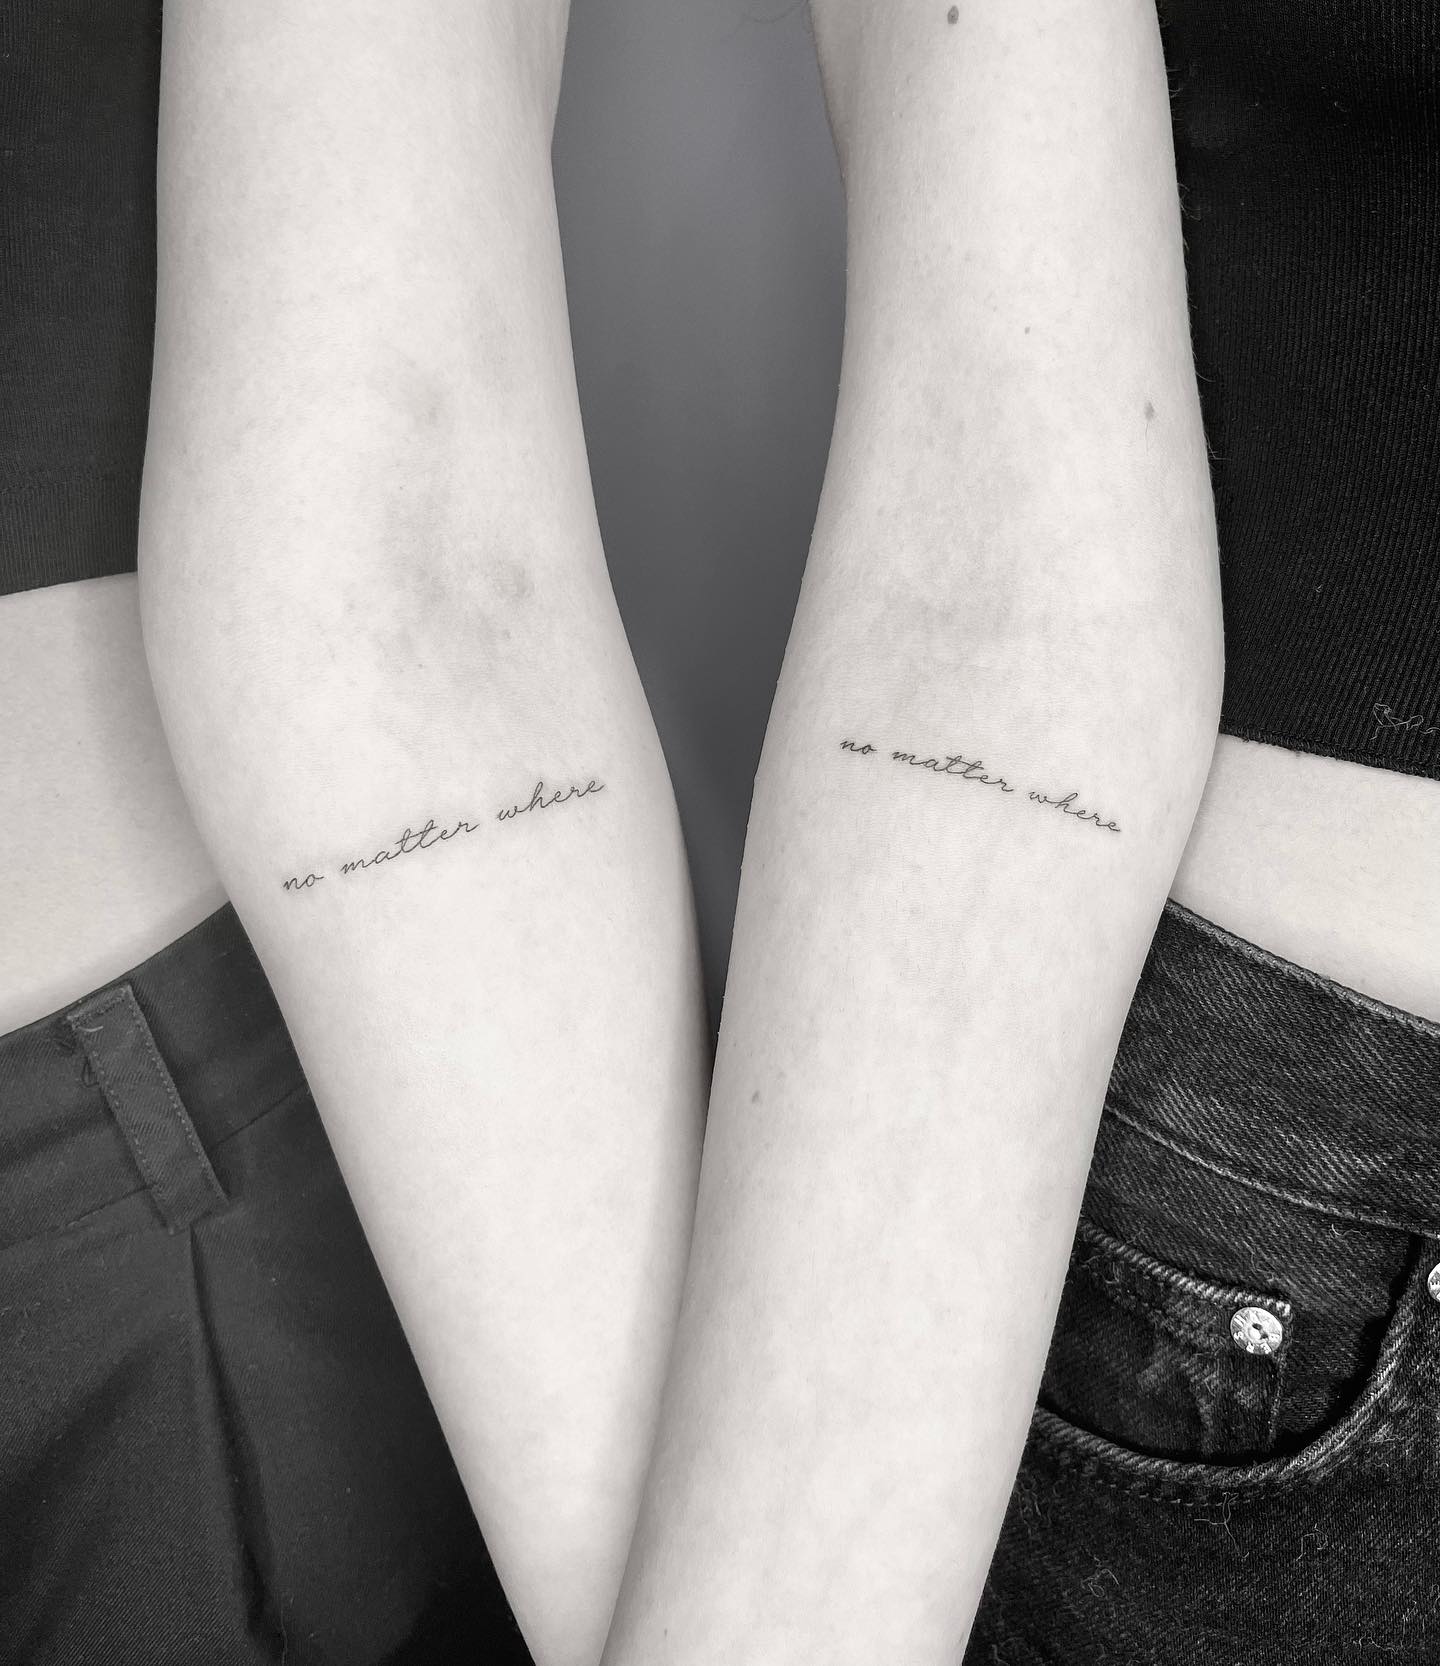 20 Small Couple Tattoo Ideas You Won't Regret Getting | Preview.ph